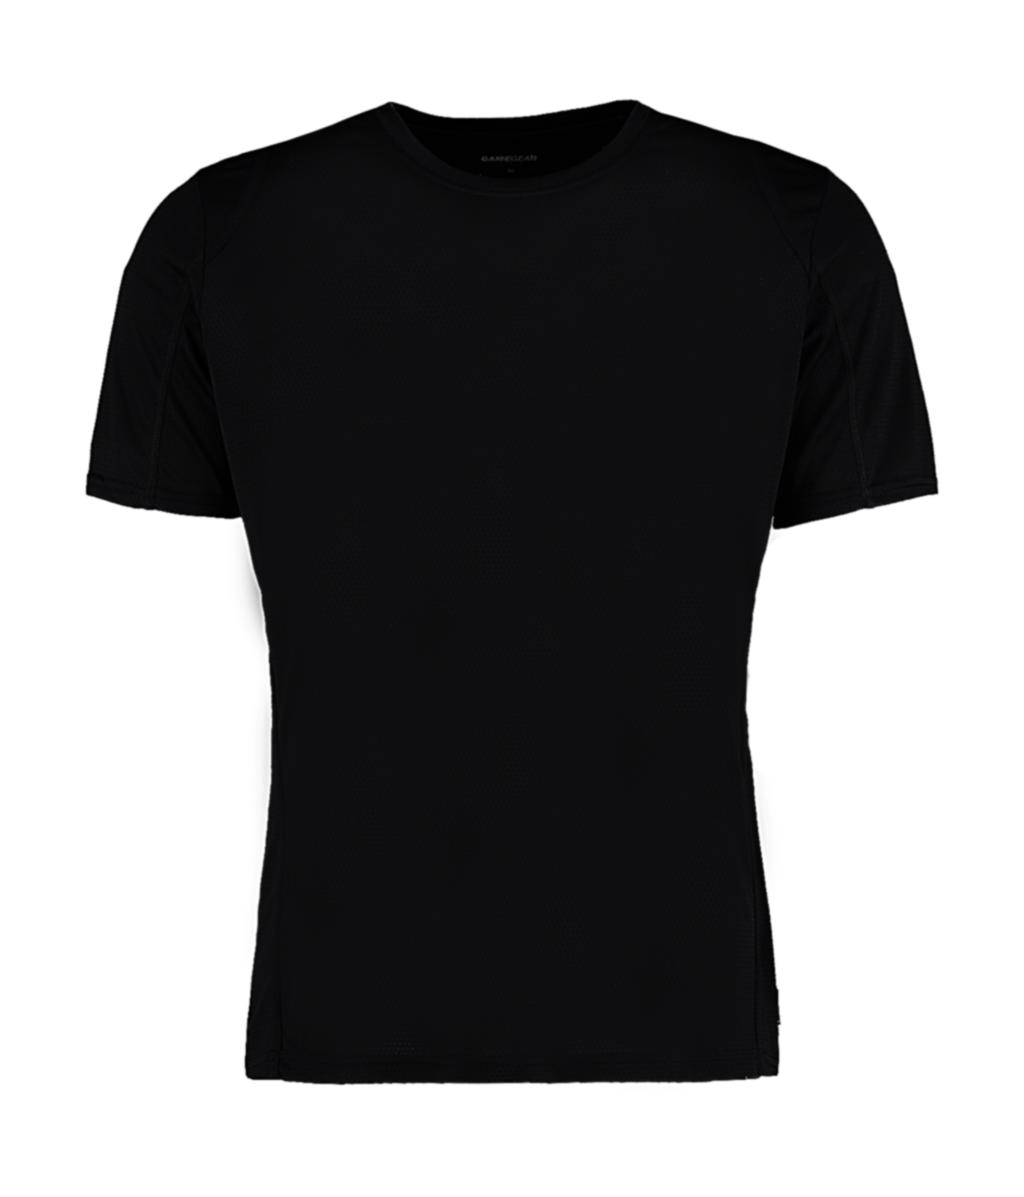  Regular Fit Cooltex? Contrast Tee in Farbe Black/Black